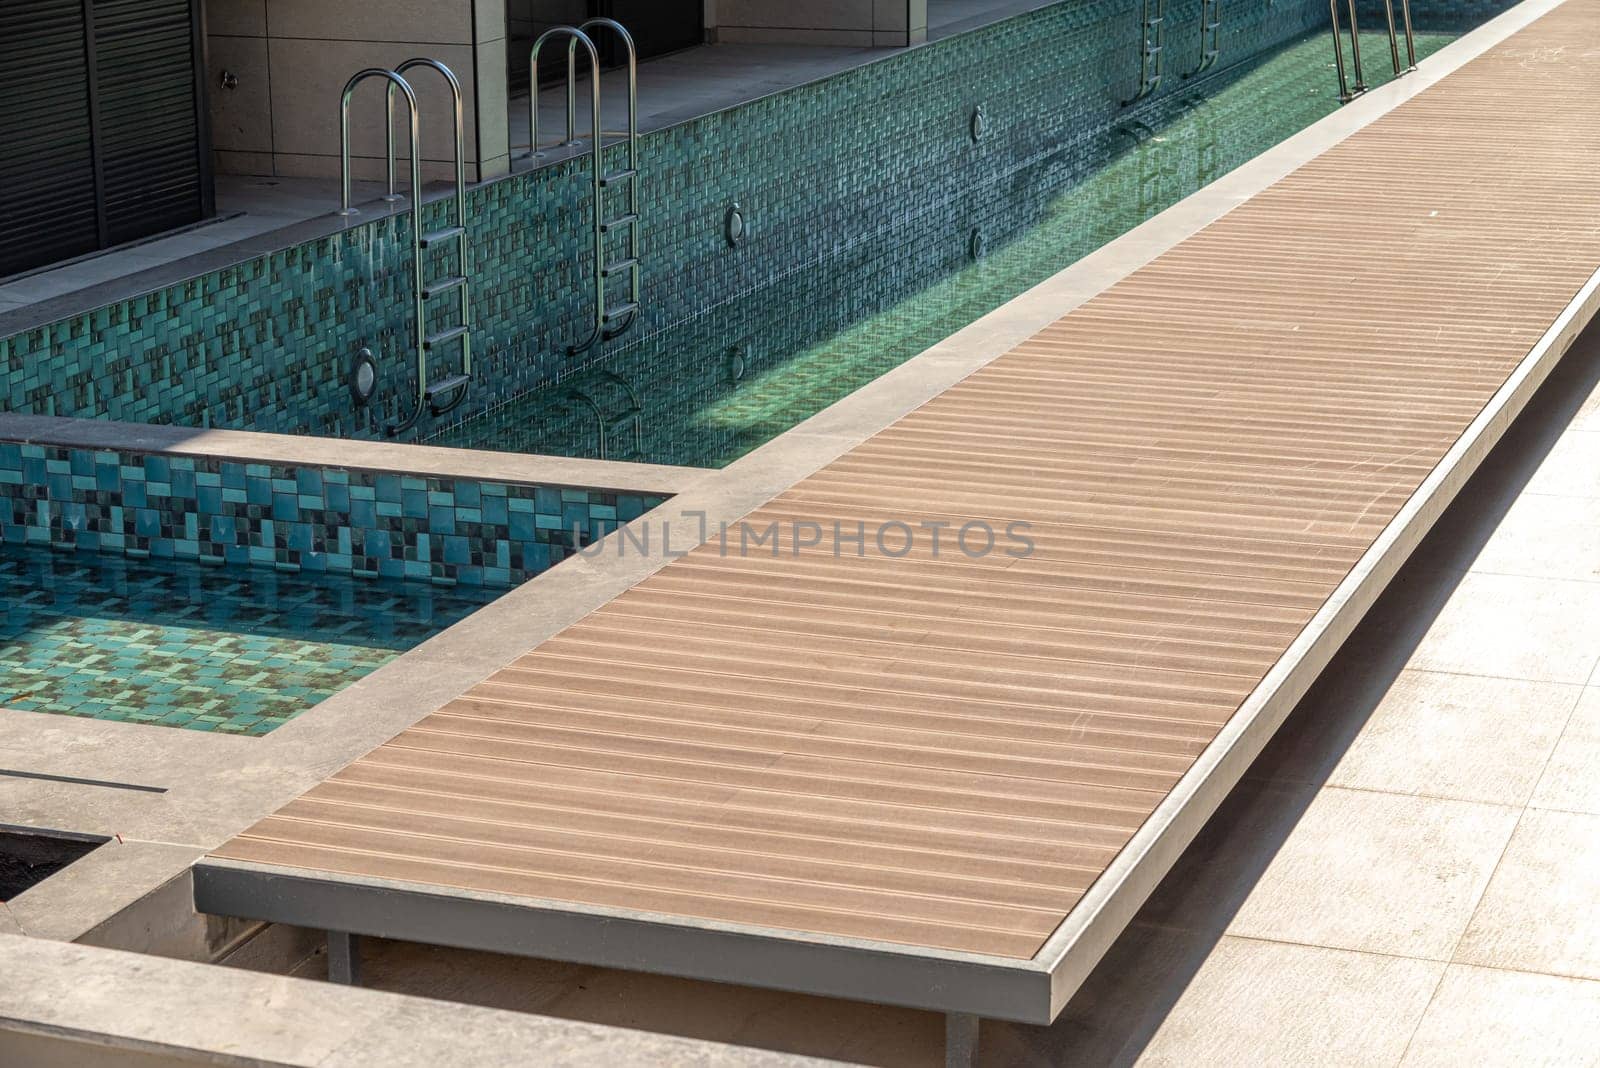 Composite deck installed on the edge of the swimming pool by Sonat